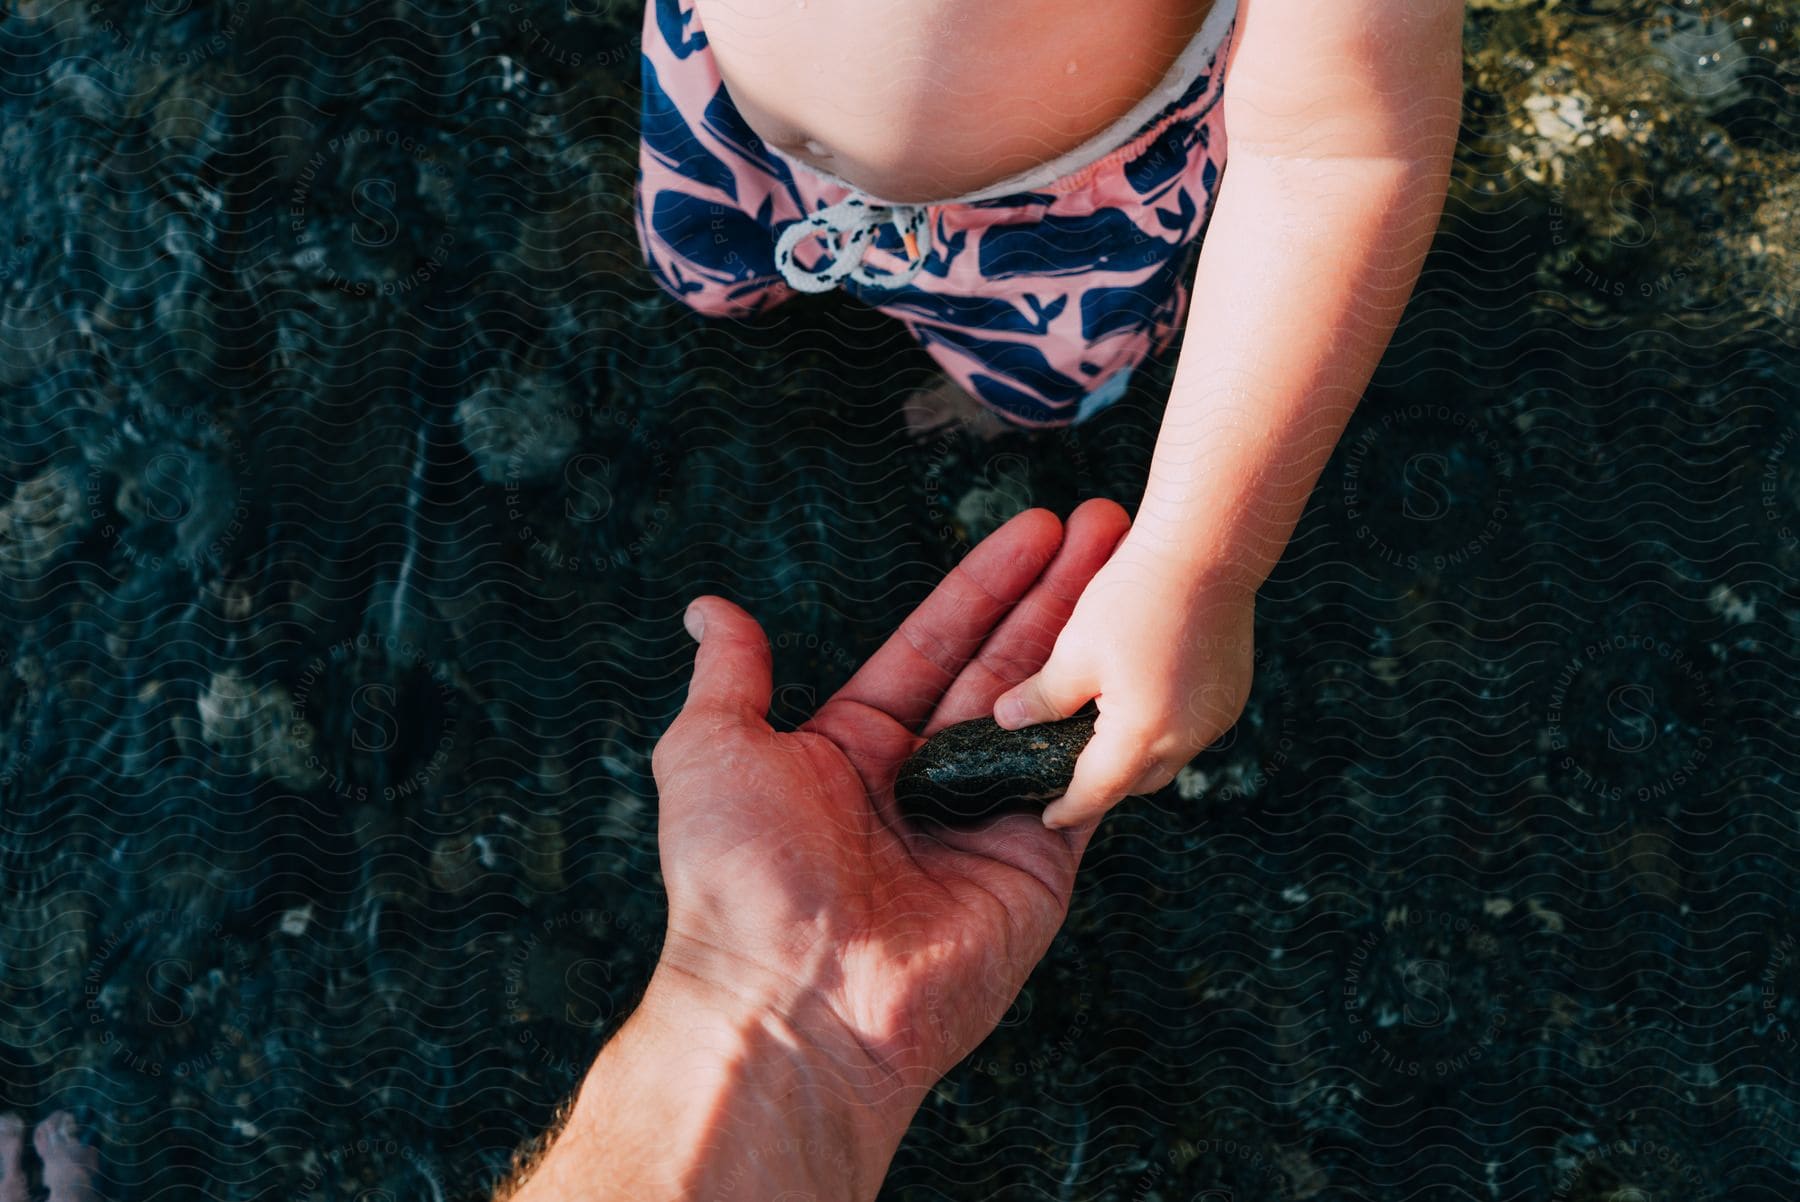 Toddler wears swim trunks standing on rocky shore, passes rock to person's open hand